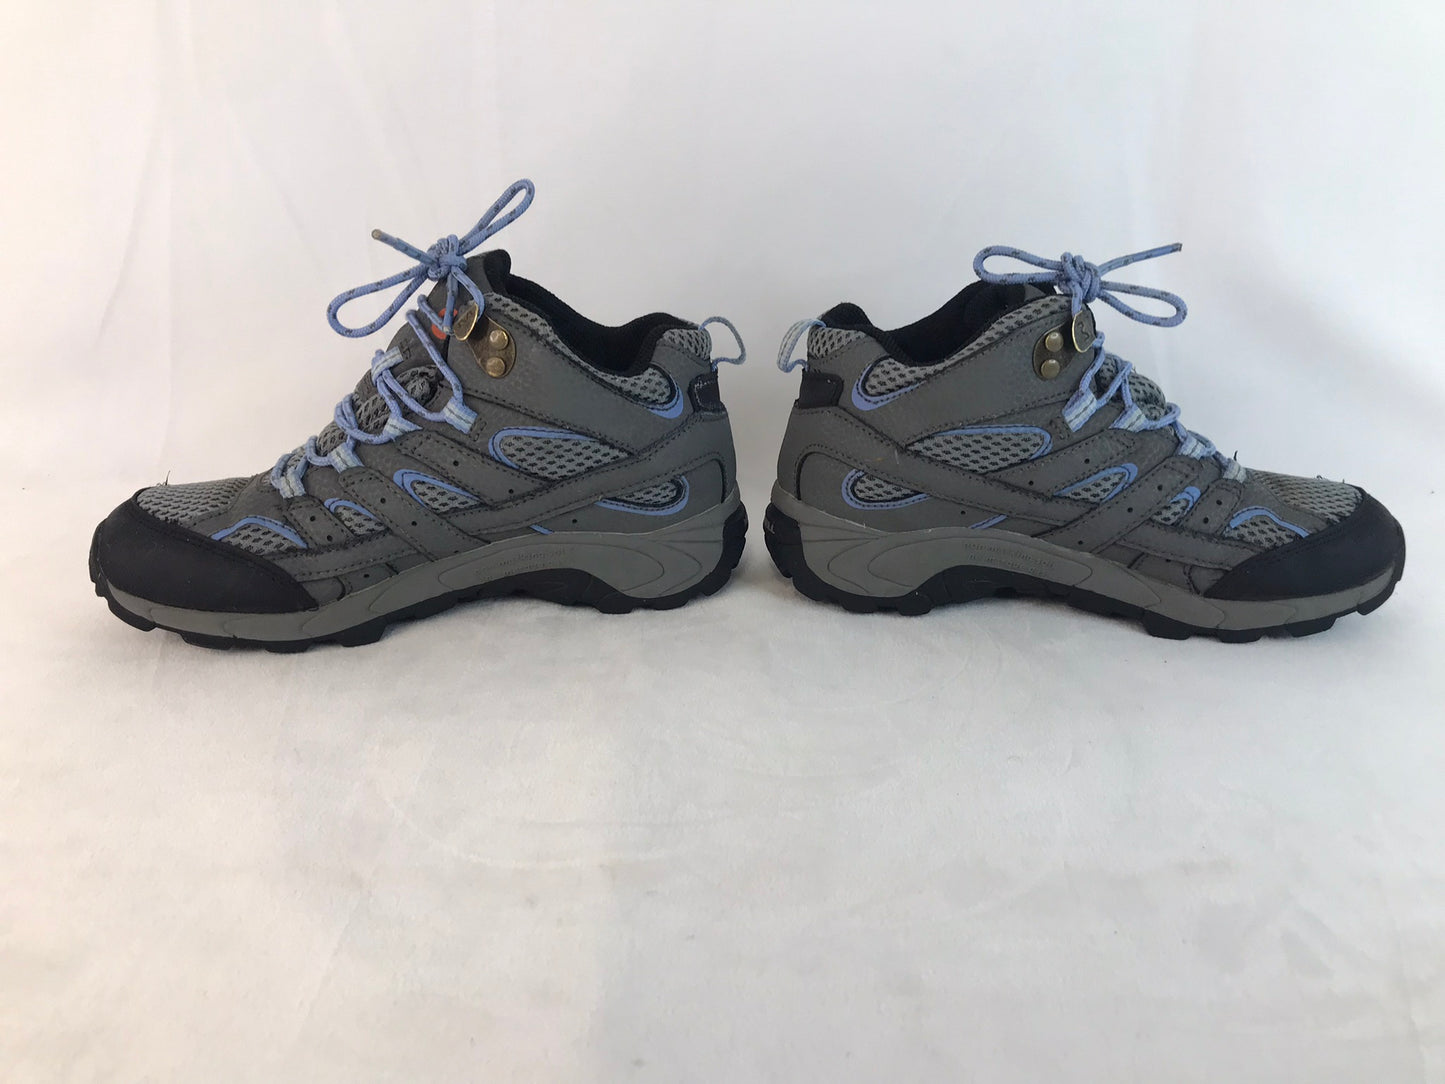 Hiking Boots Child Size 3 Merrell Moab 2 Waterproof Rubber Sole Blue Grey Excellent